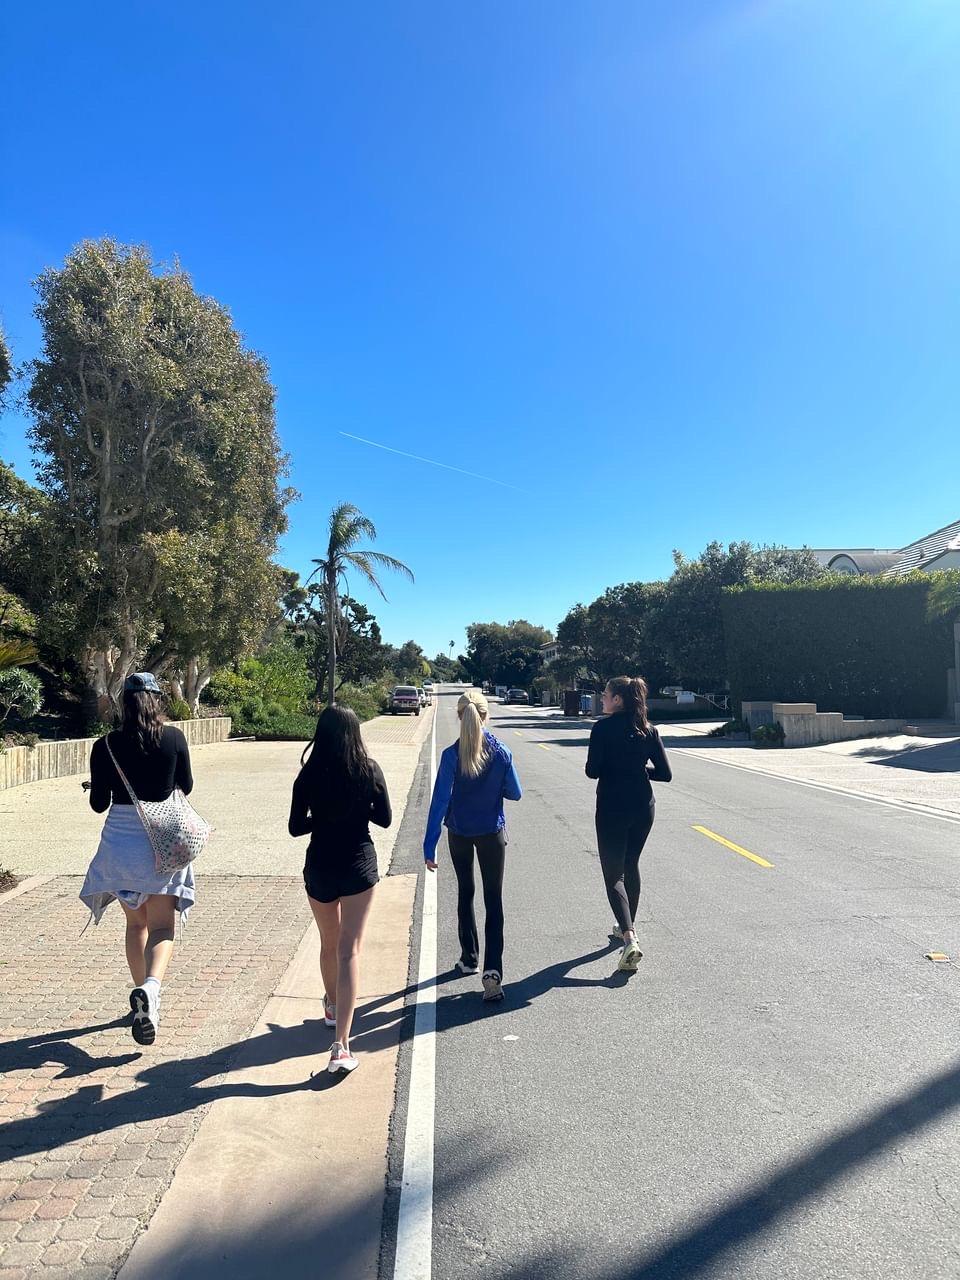 From left, Ming Hsu, Nicole Rocha, Frances Cottrell and Laci Bowman walk together during one of the first meetings of the Hot Girl Walk Club. Cottrell said during the first meet-ups she quickly found the club to be a great community of supportive women. Photo courtesy of Laci Bowman